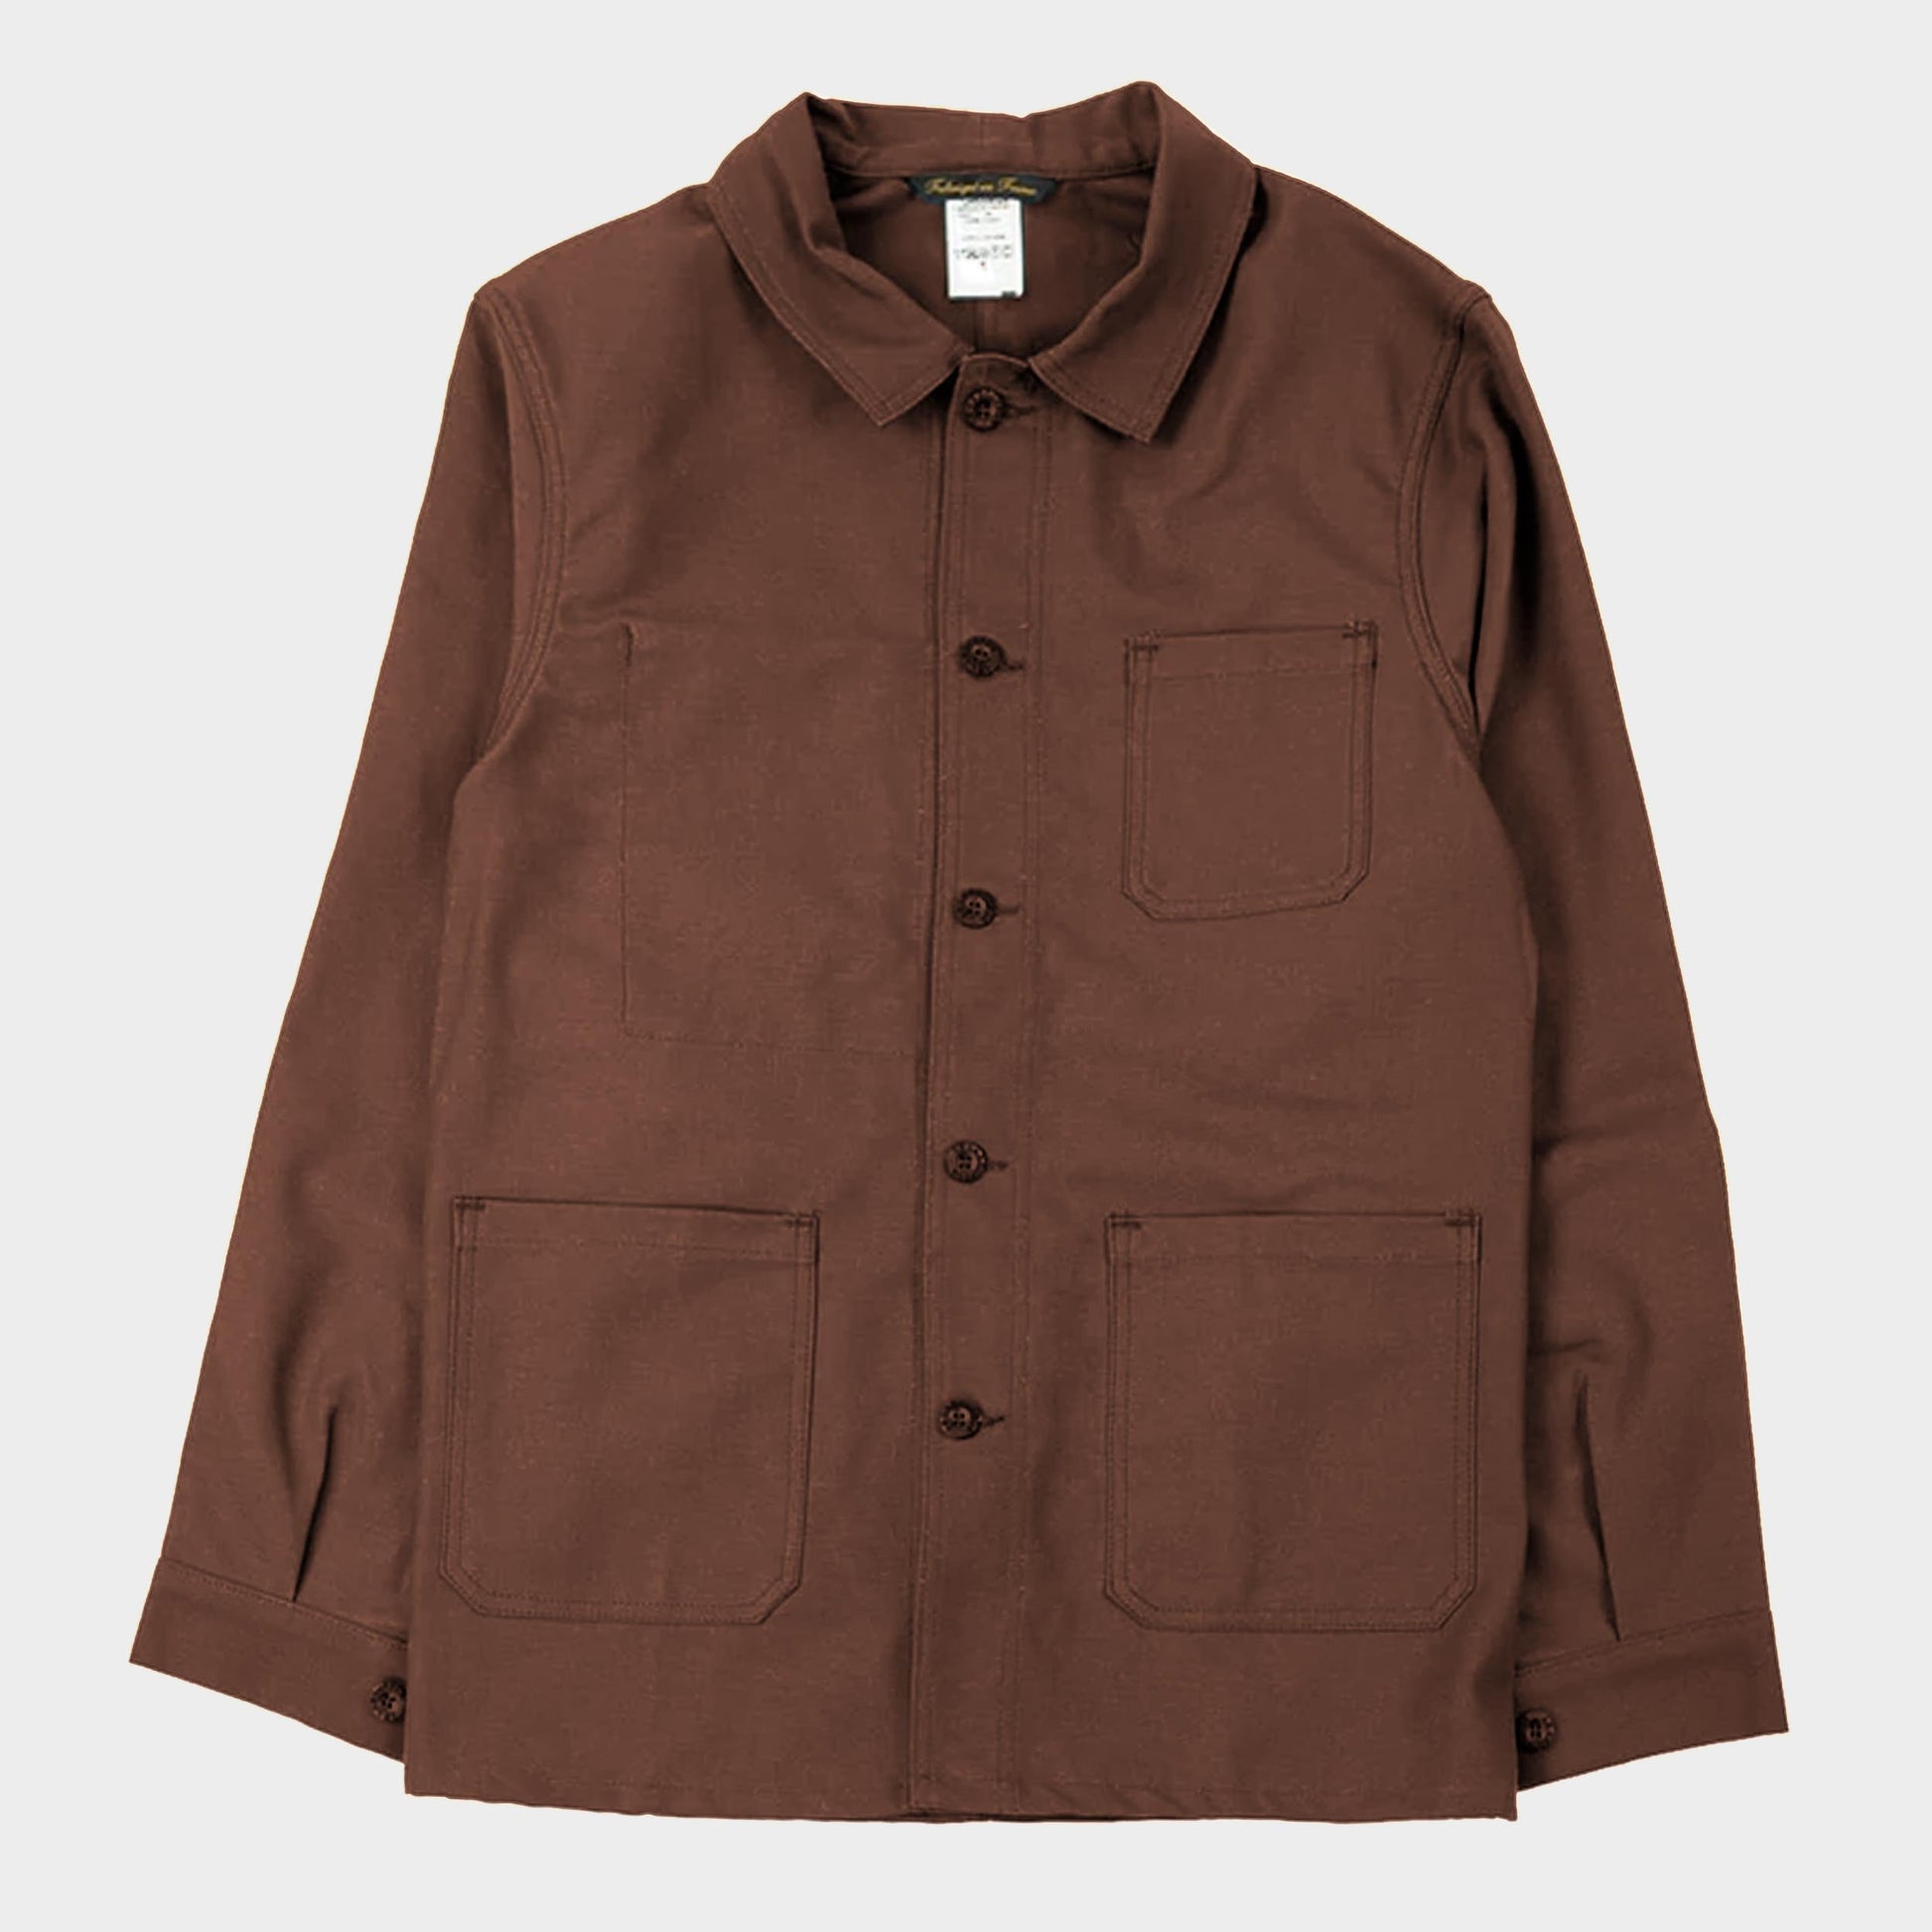 Le Laboureur French Cotton Work Jacket in Brown